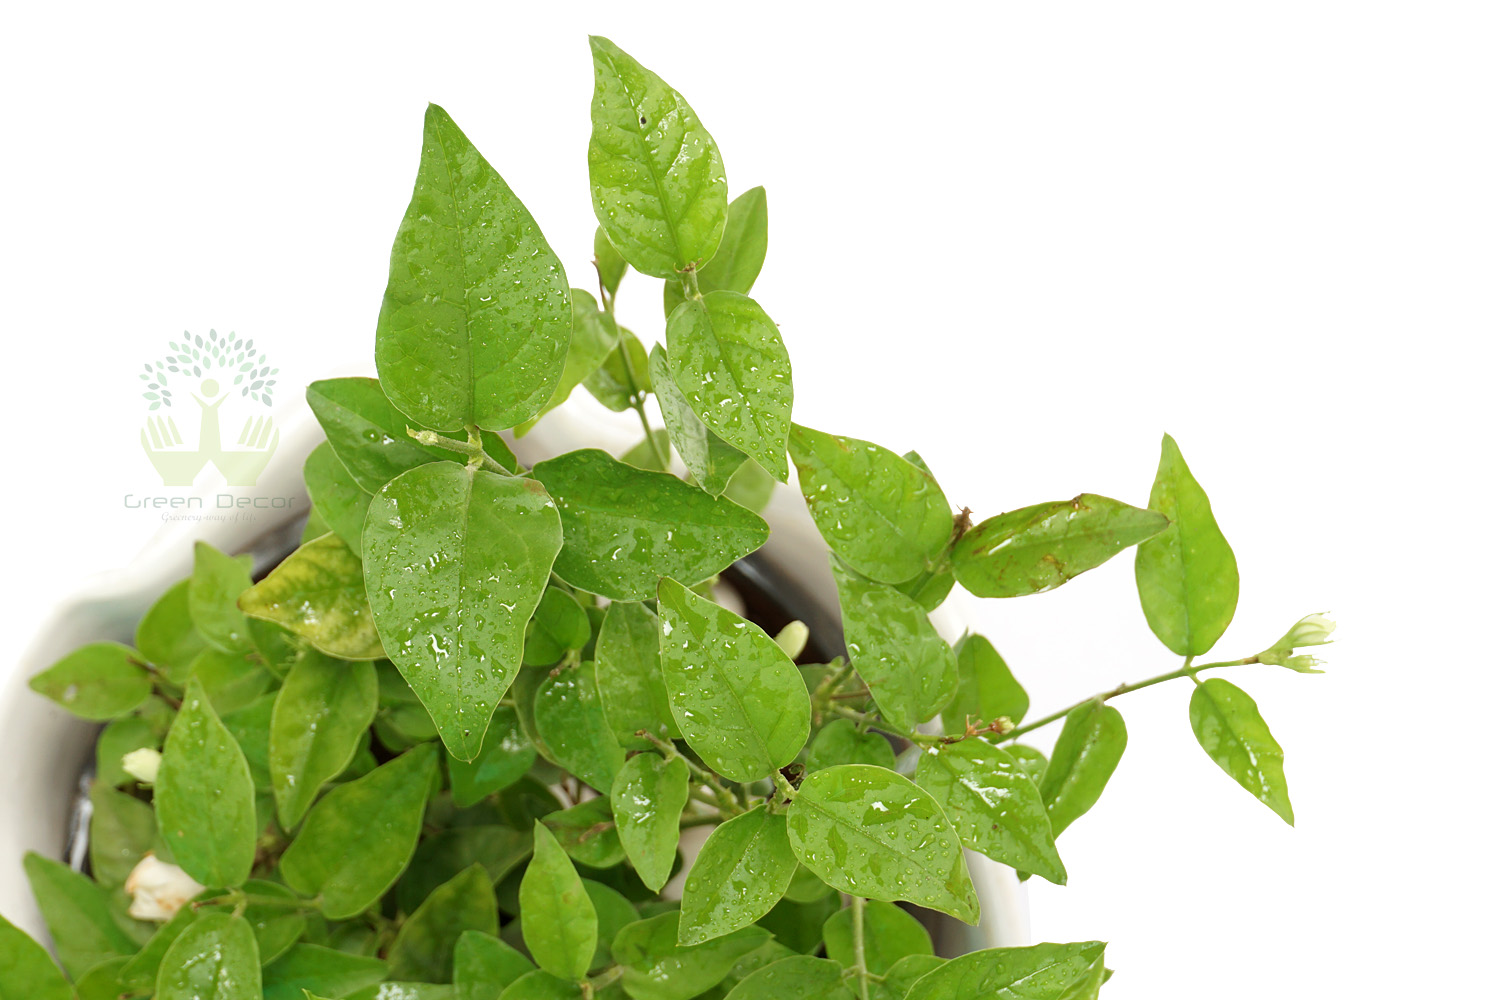 Buy Mogra Plants Leaves View , White Pots and seeds in Delhi NCR by the best online nursery shop Greendecor.